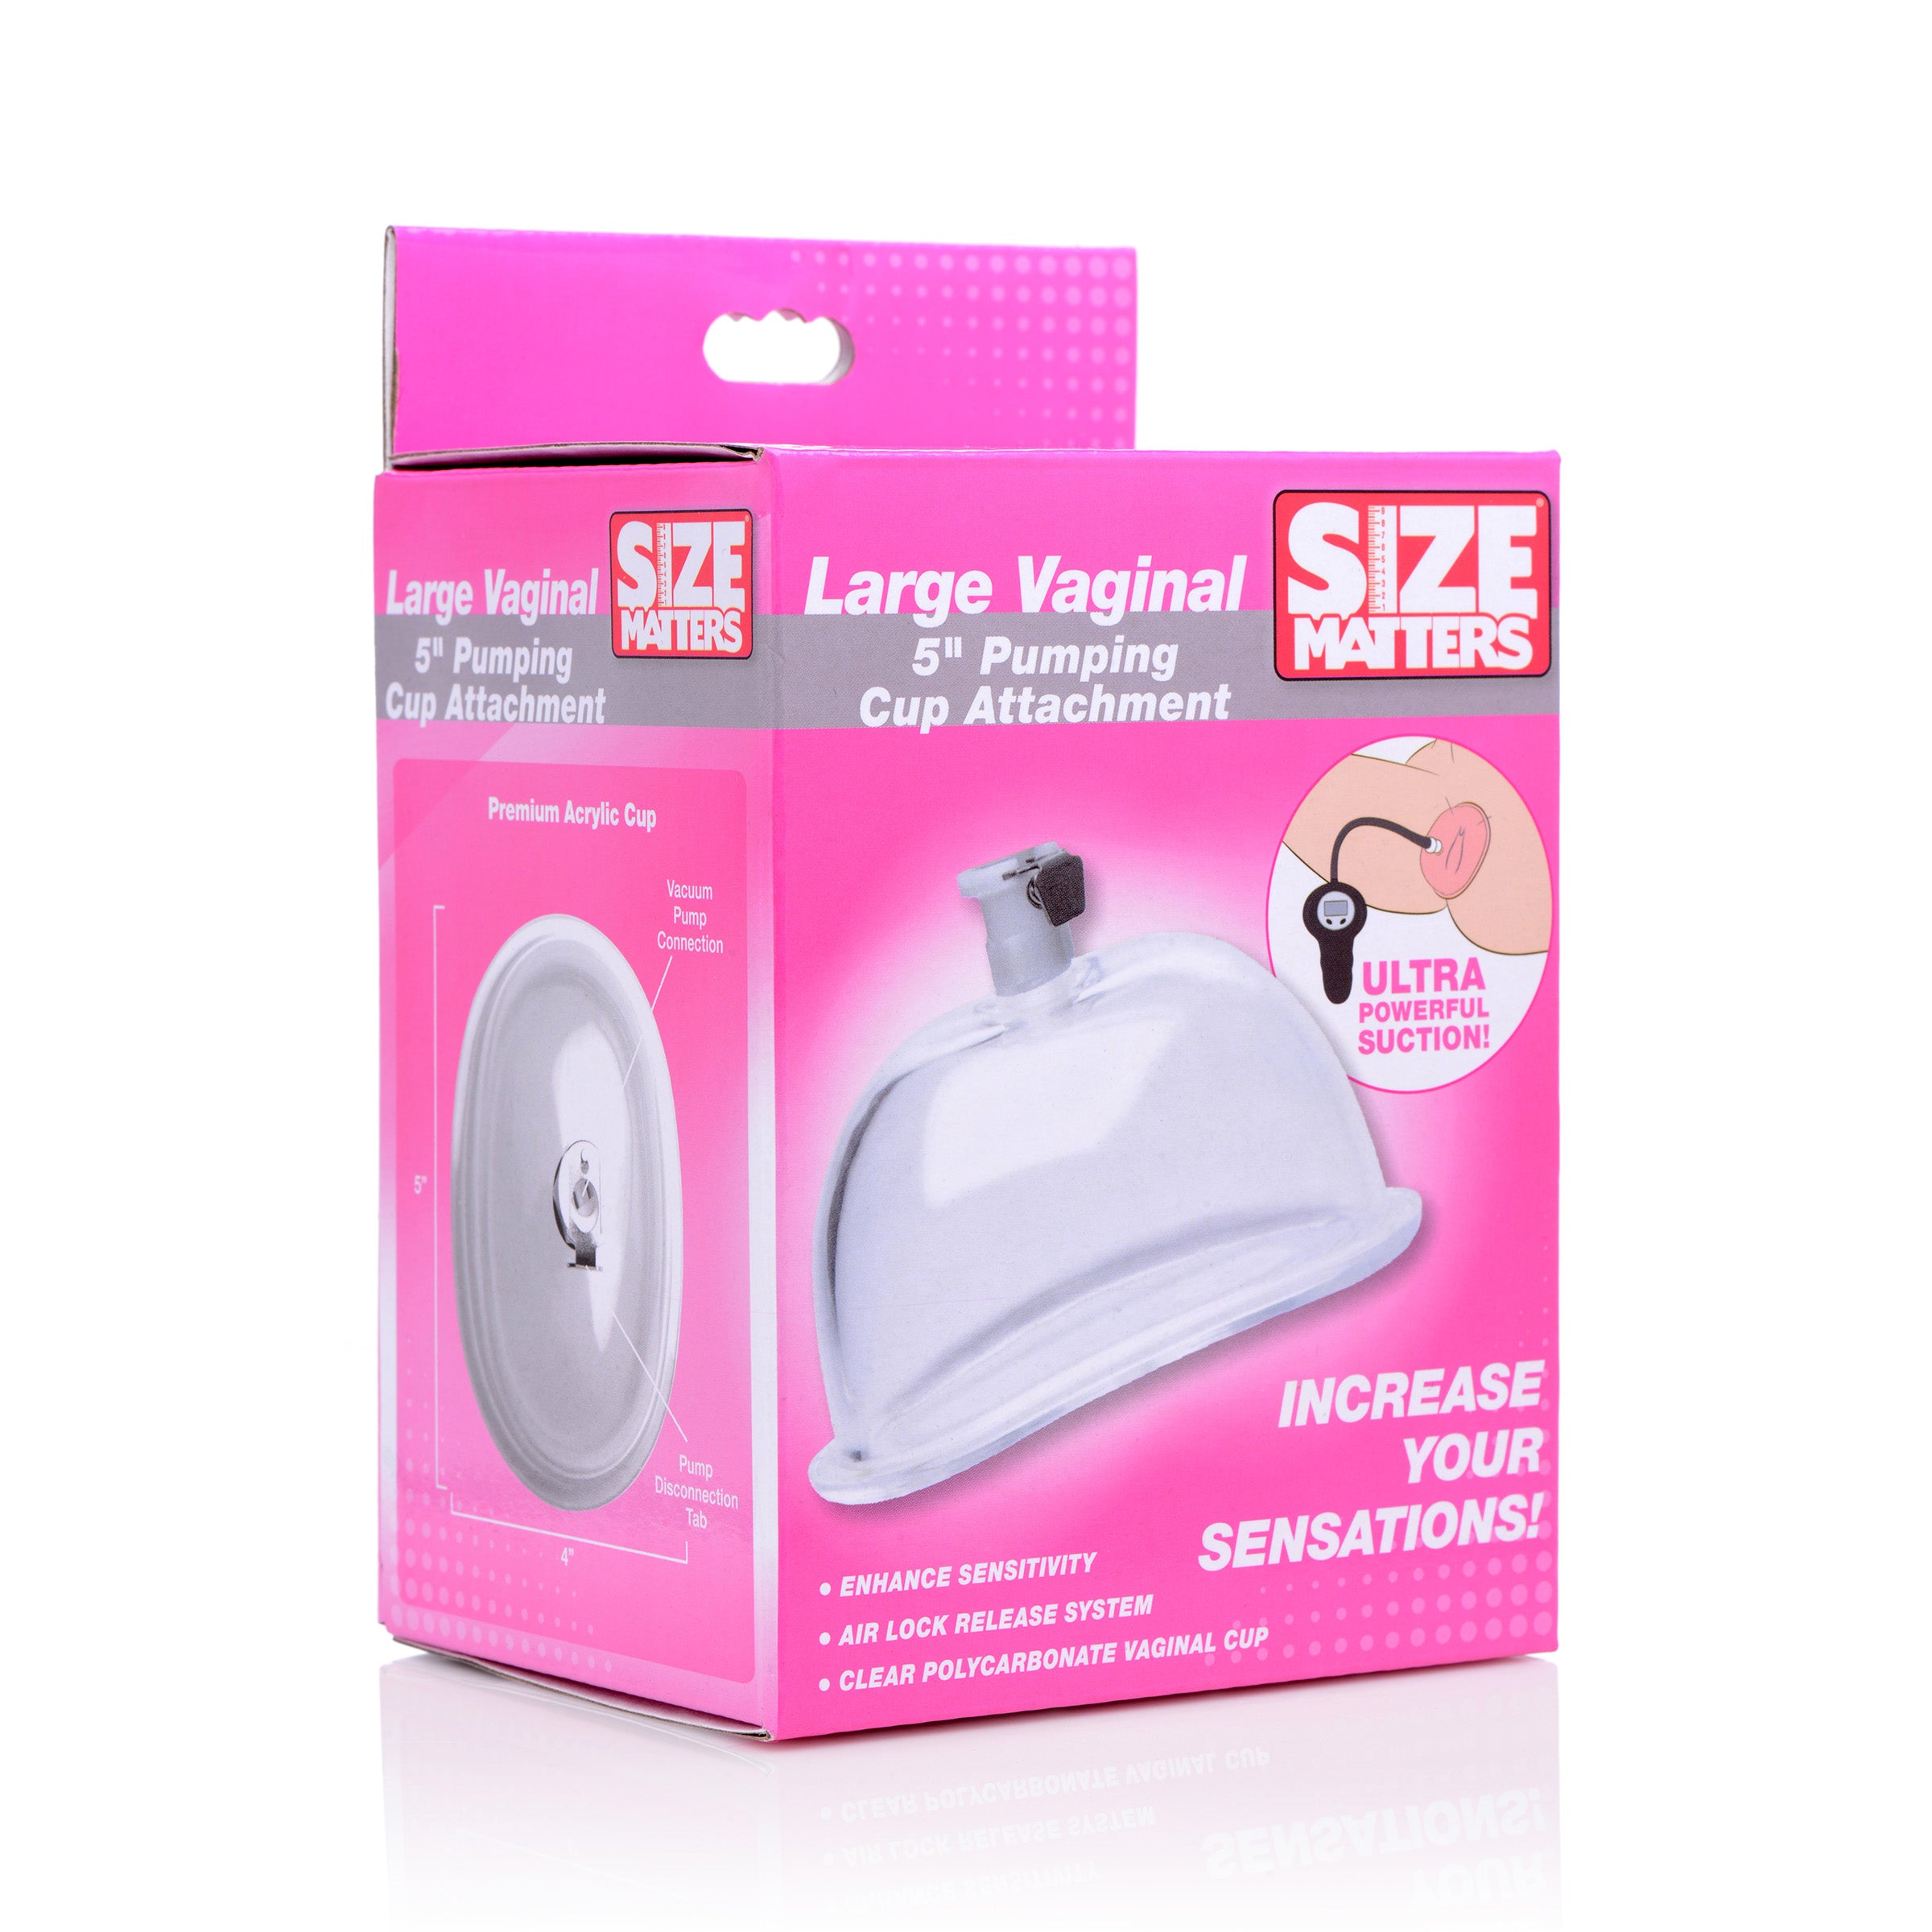 Large Vaginal 5 inch Pumping Cup Attachment